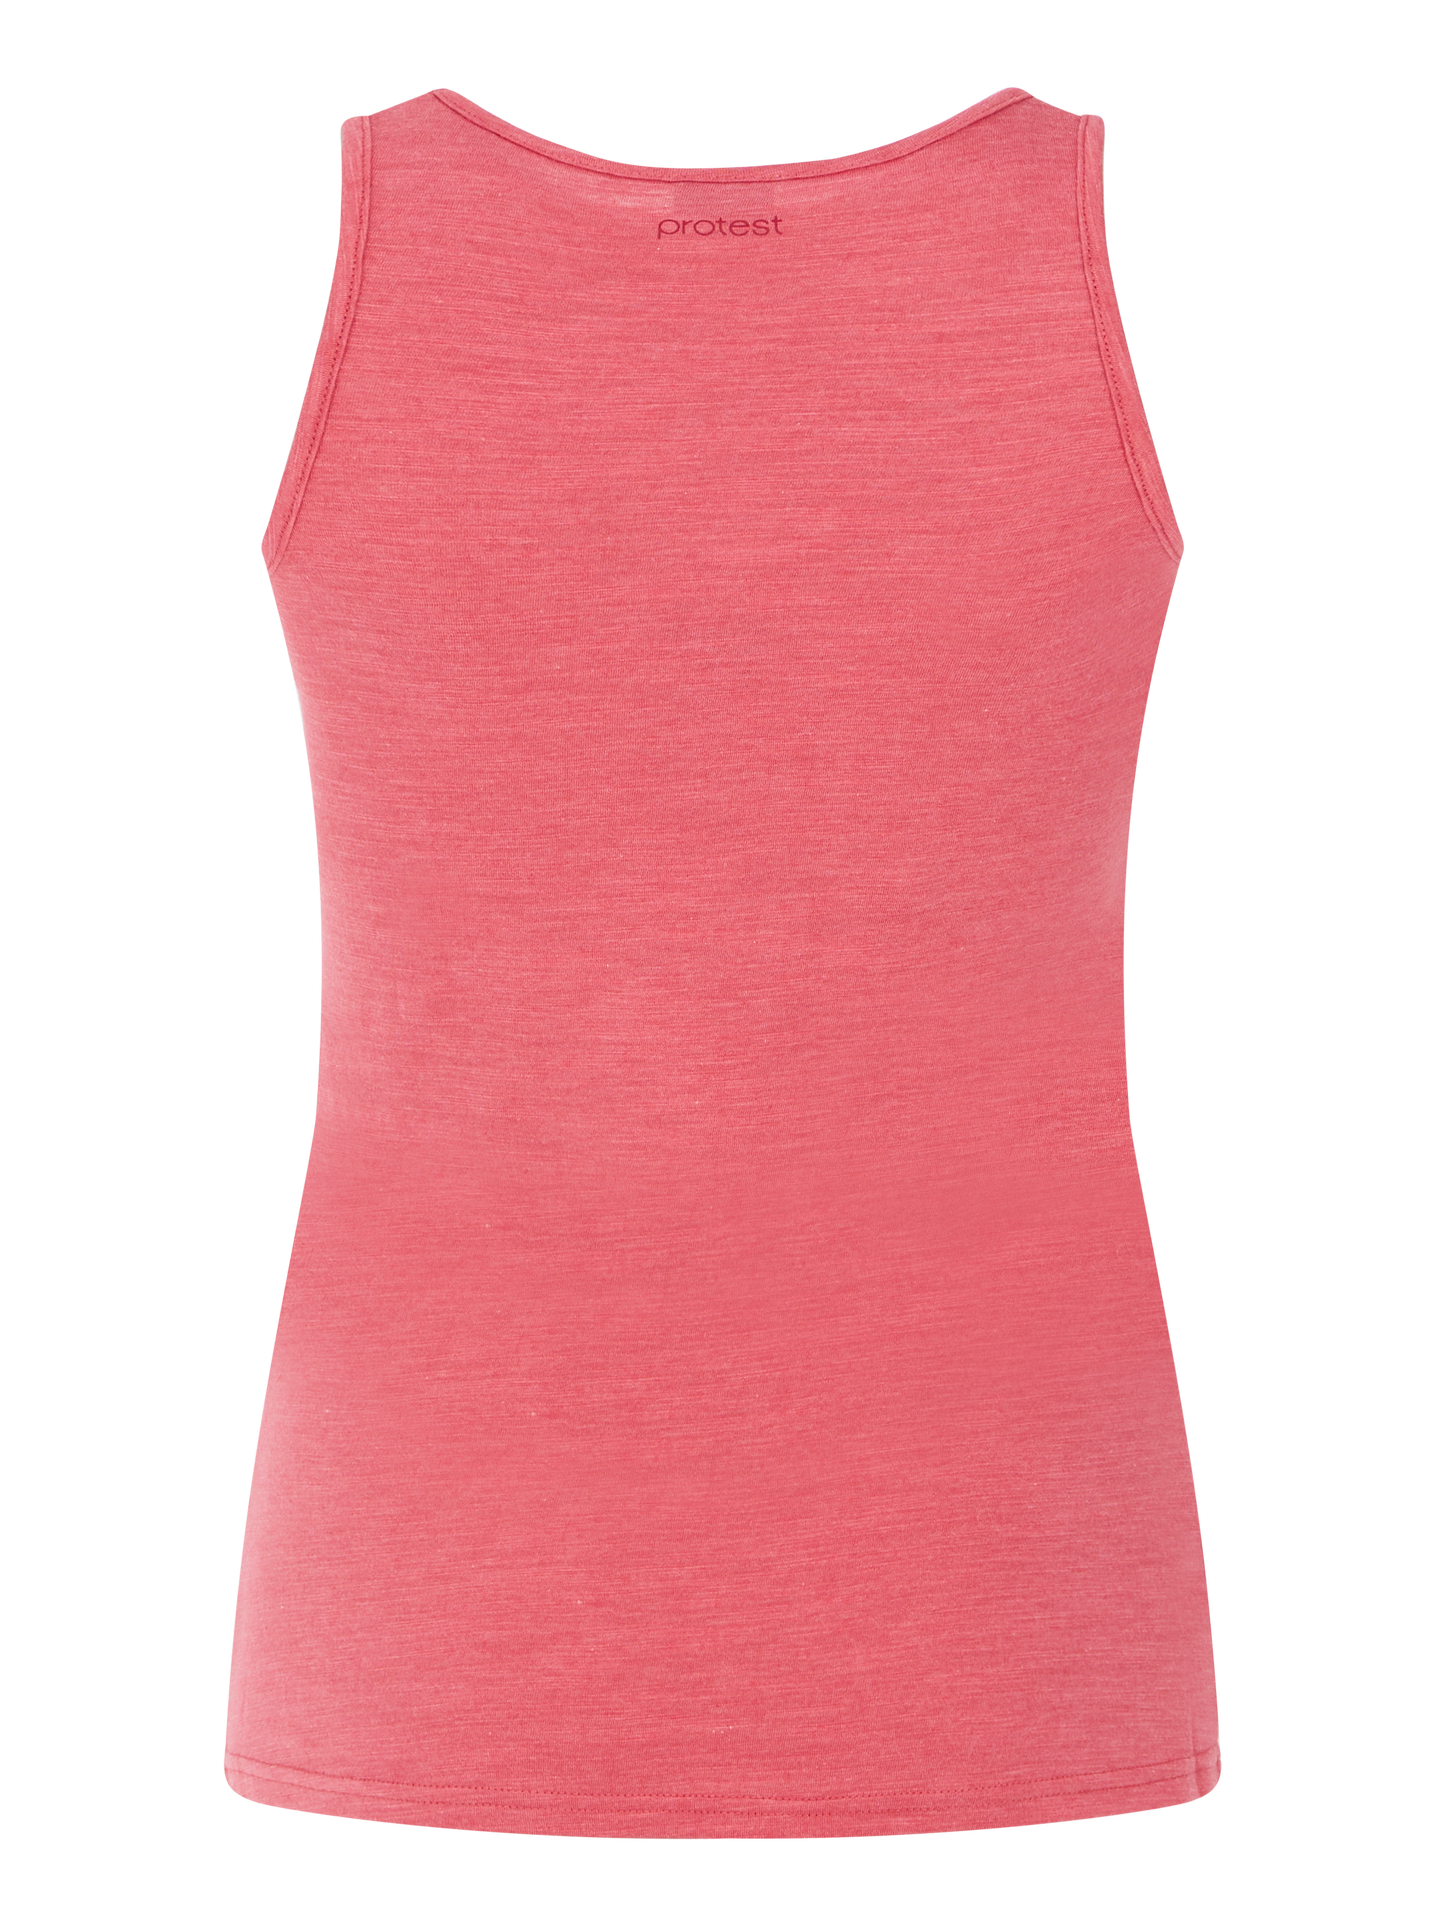 Protest Impulse Vest Top in Smooth Pink